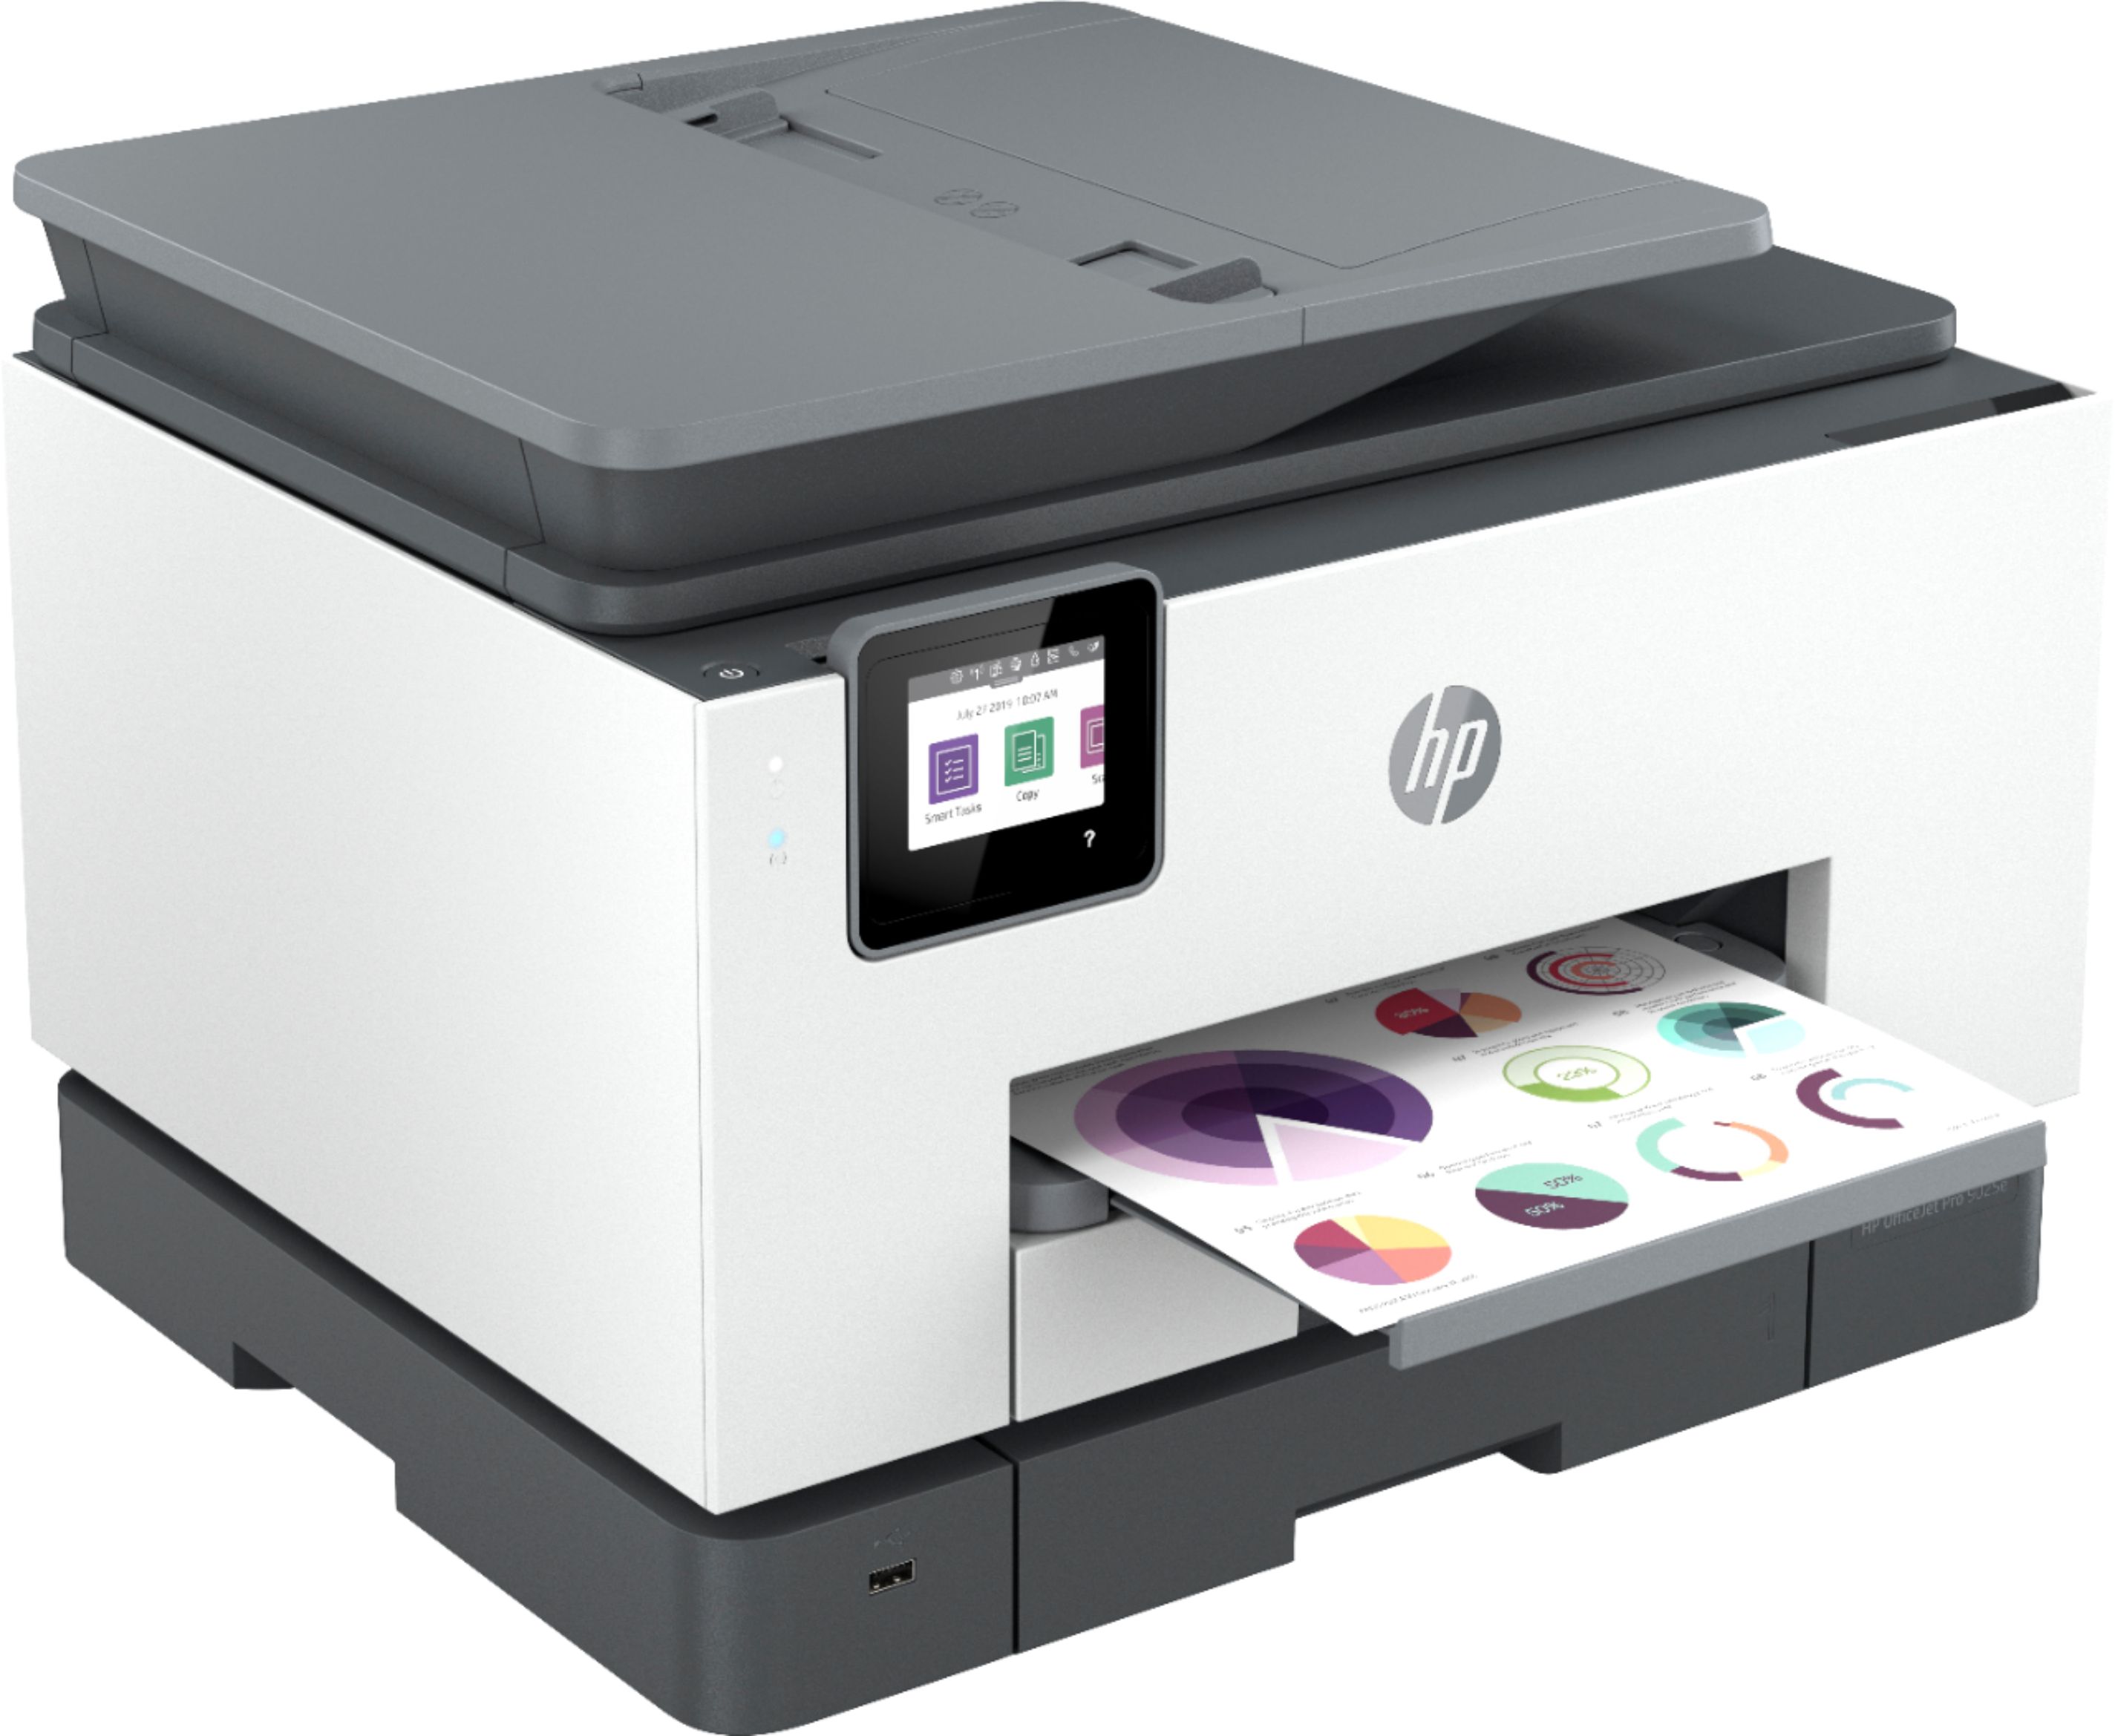 Angle View: HP - OfficeJet Pro 9025e Wireless All-In-One Inkjet Printer with 6 months of Instant Ink Included with HP+ - White